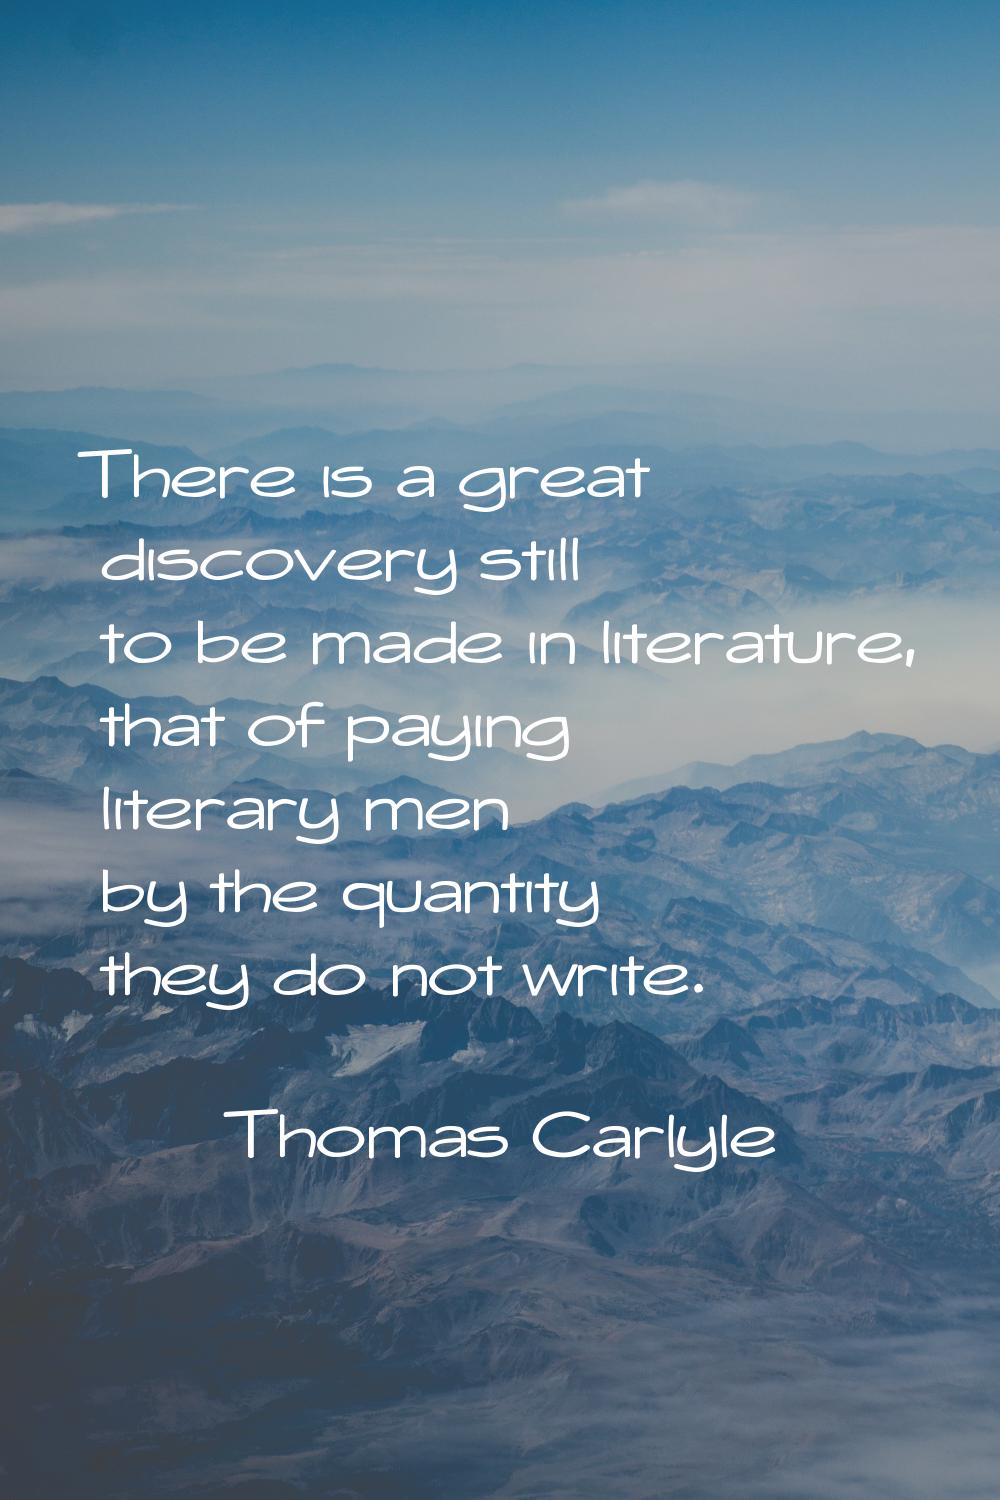 There is a great discovery still to be made in literature, that of paying literary men by the quant